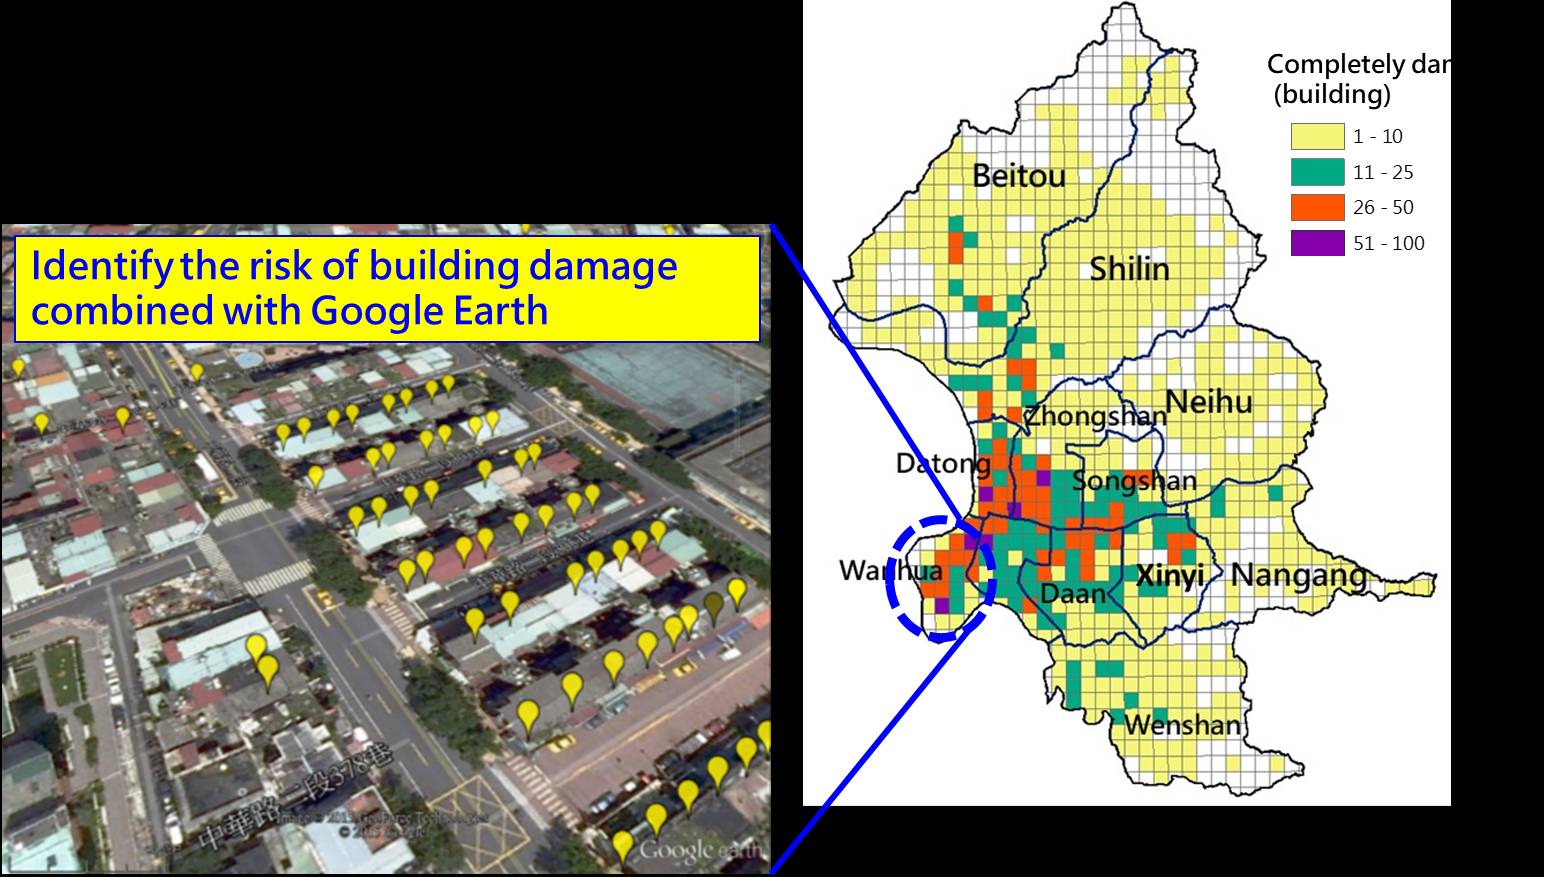 Analyzed earthquake impact on old buildings in six municipalities